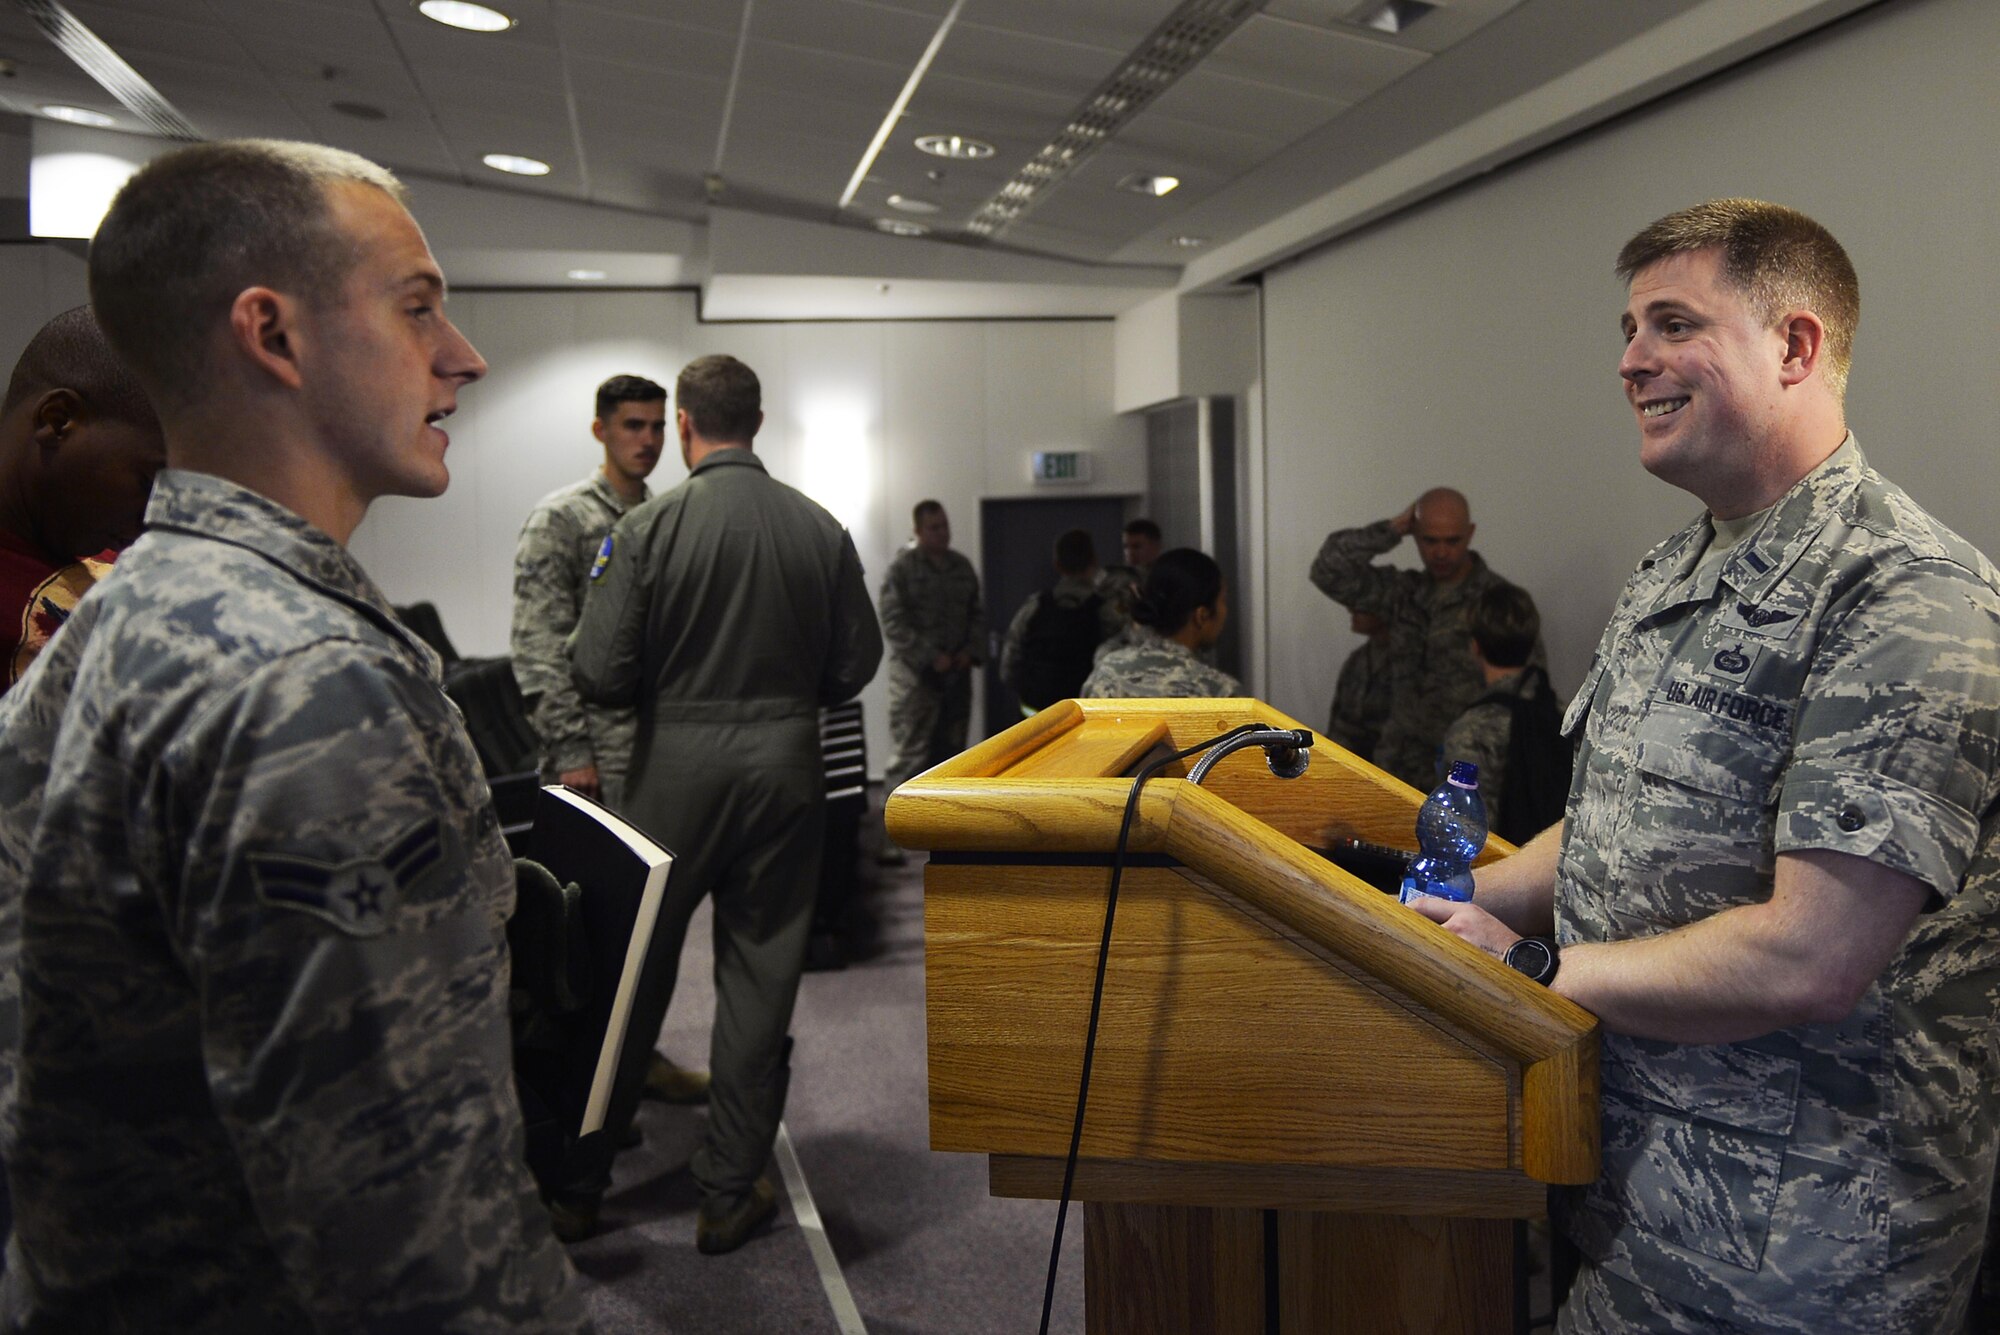 1st Lt. Matthew Barnett, 693rd Intelligence, Surveillance, and Reconnaissance Group executive officer, right, speaks with an Airmen during a commissioning town hall on Ramstein Air Base, Germany, Sept. 21, 2017. The Ramstein Education Office teamed up with Air Force company grade officers from around the area to conduct the event for Airmen interested in commissioning as officers in the Air Force. (U.S. Air Force photo by Airman 1st Class Joshua Magbanua)